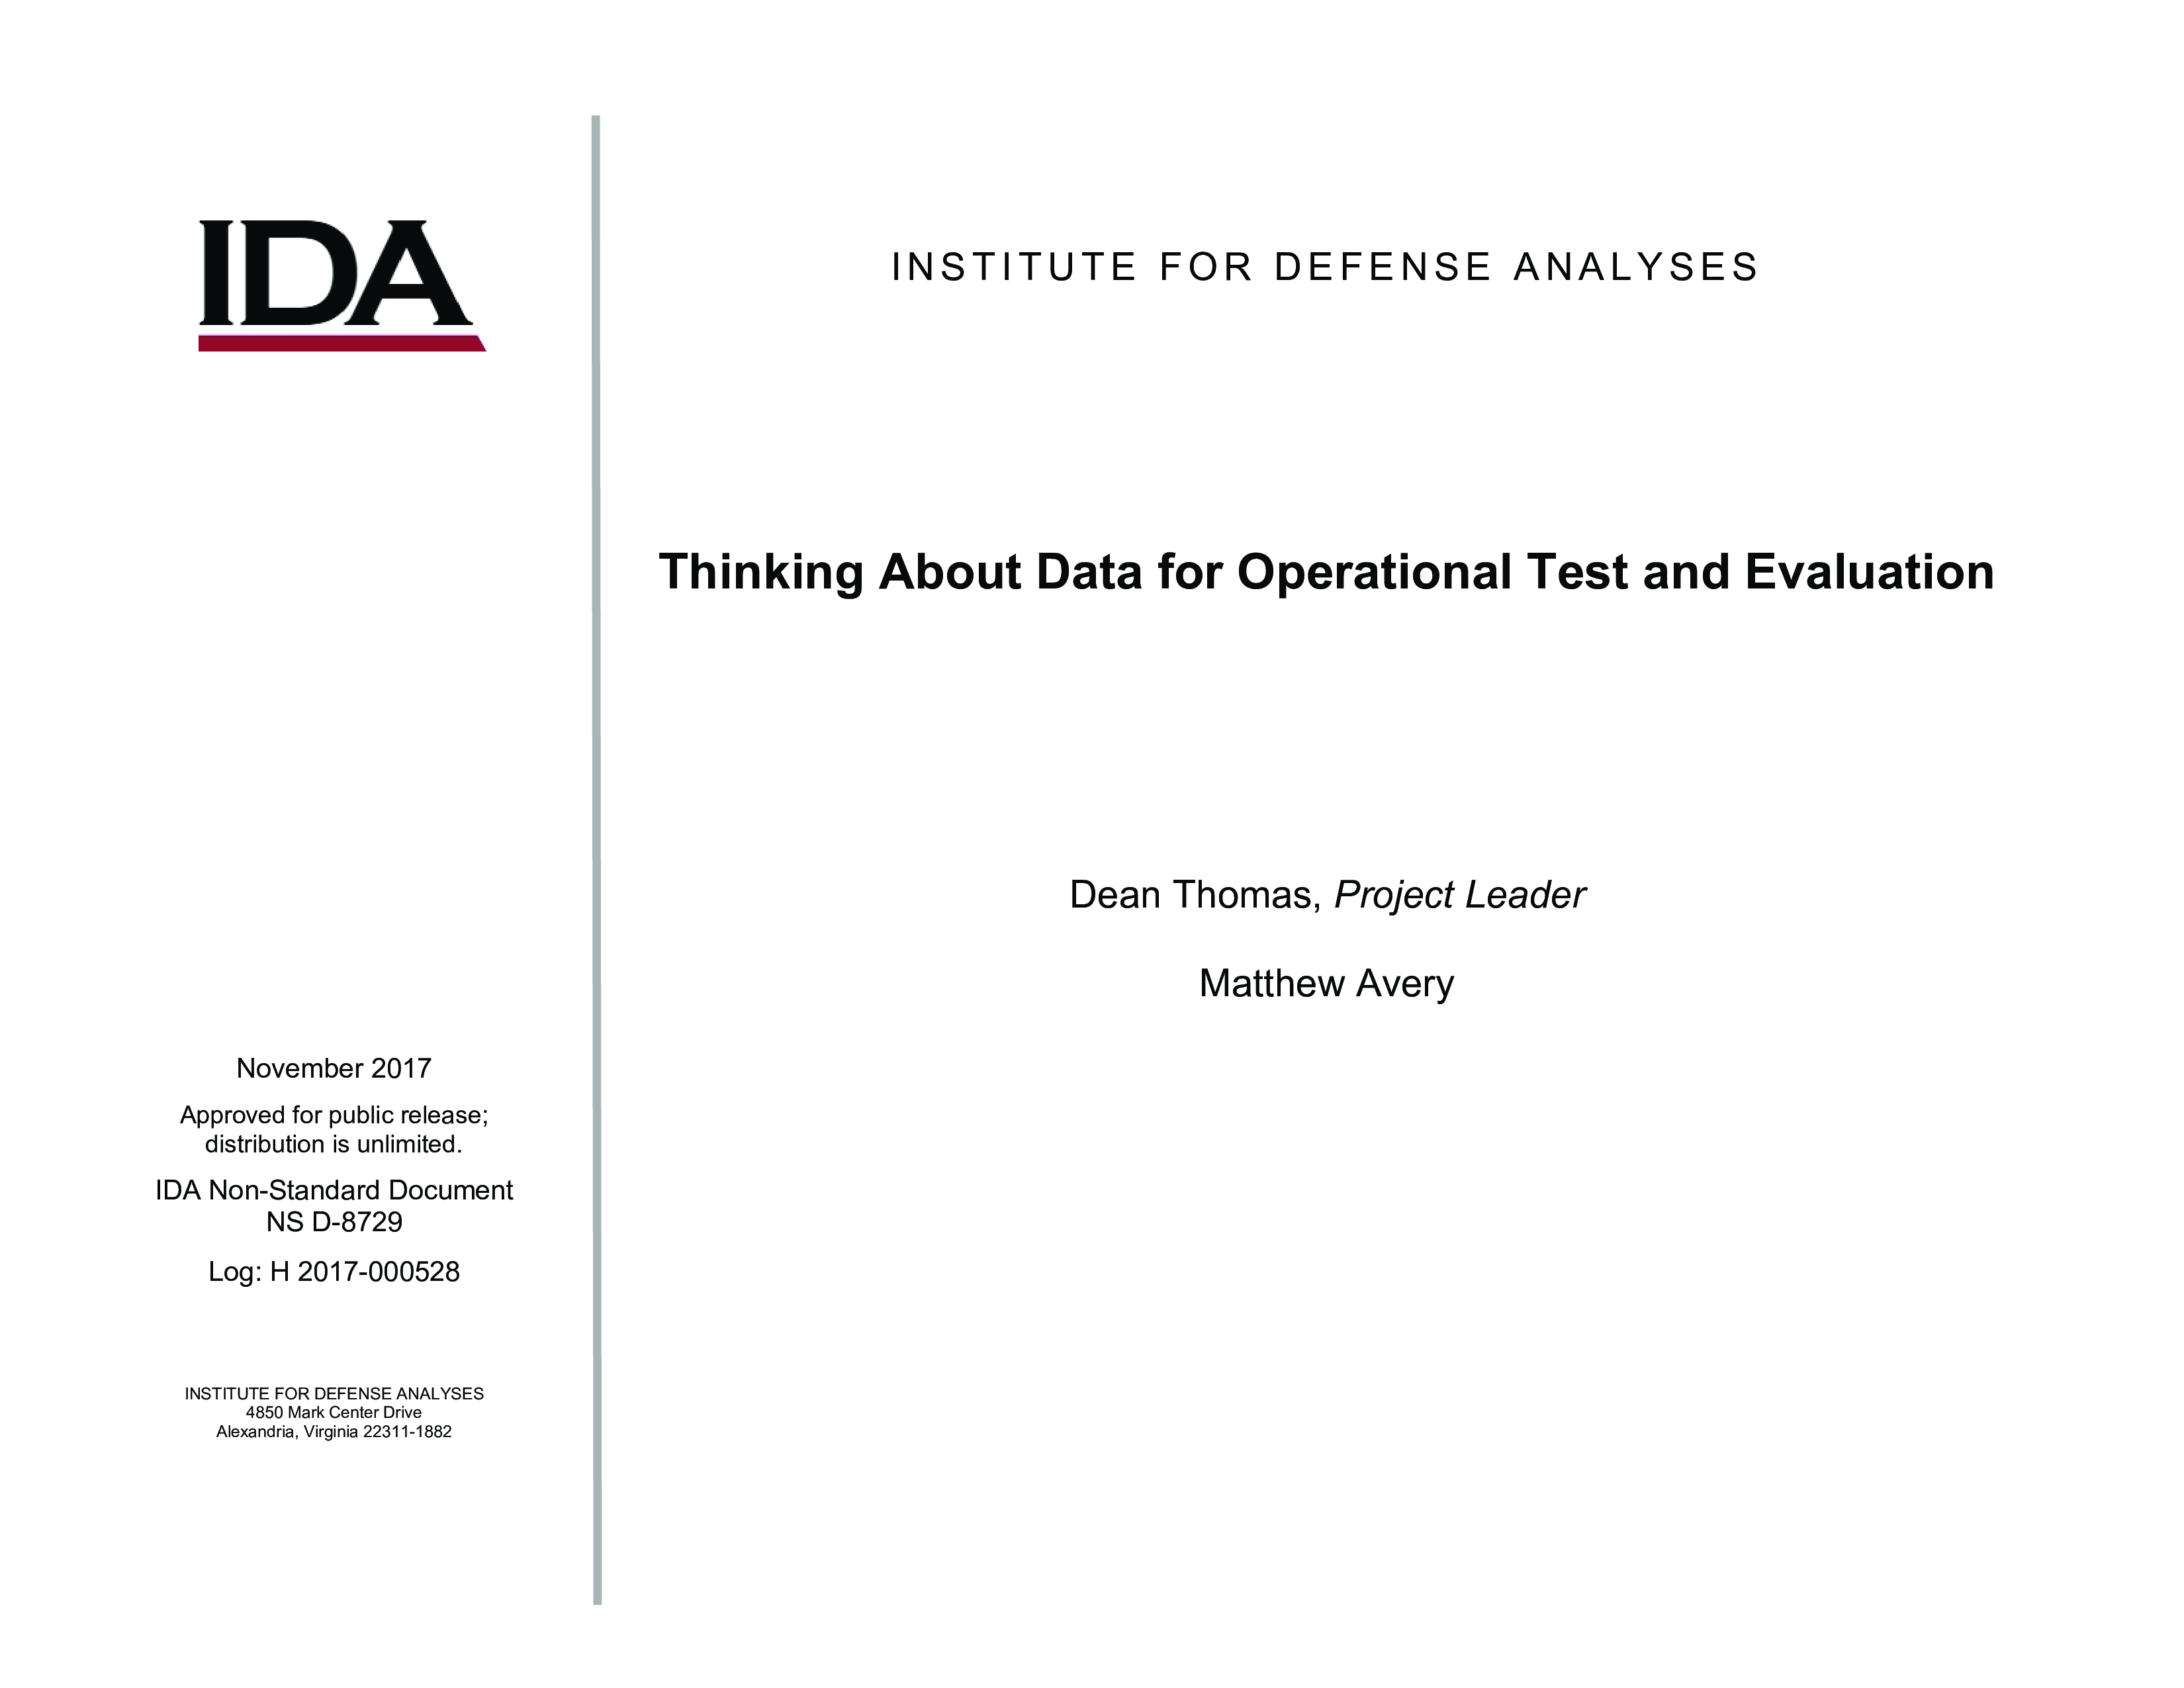 Thinking About Data for Operational Test and Evaluation